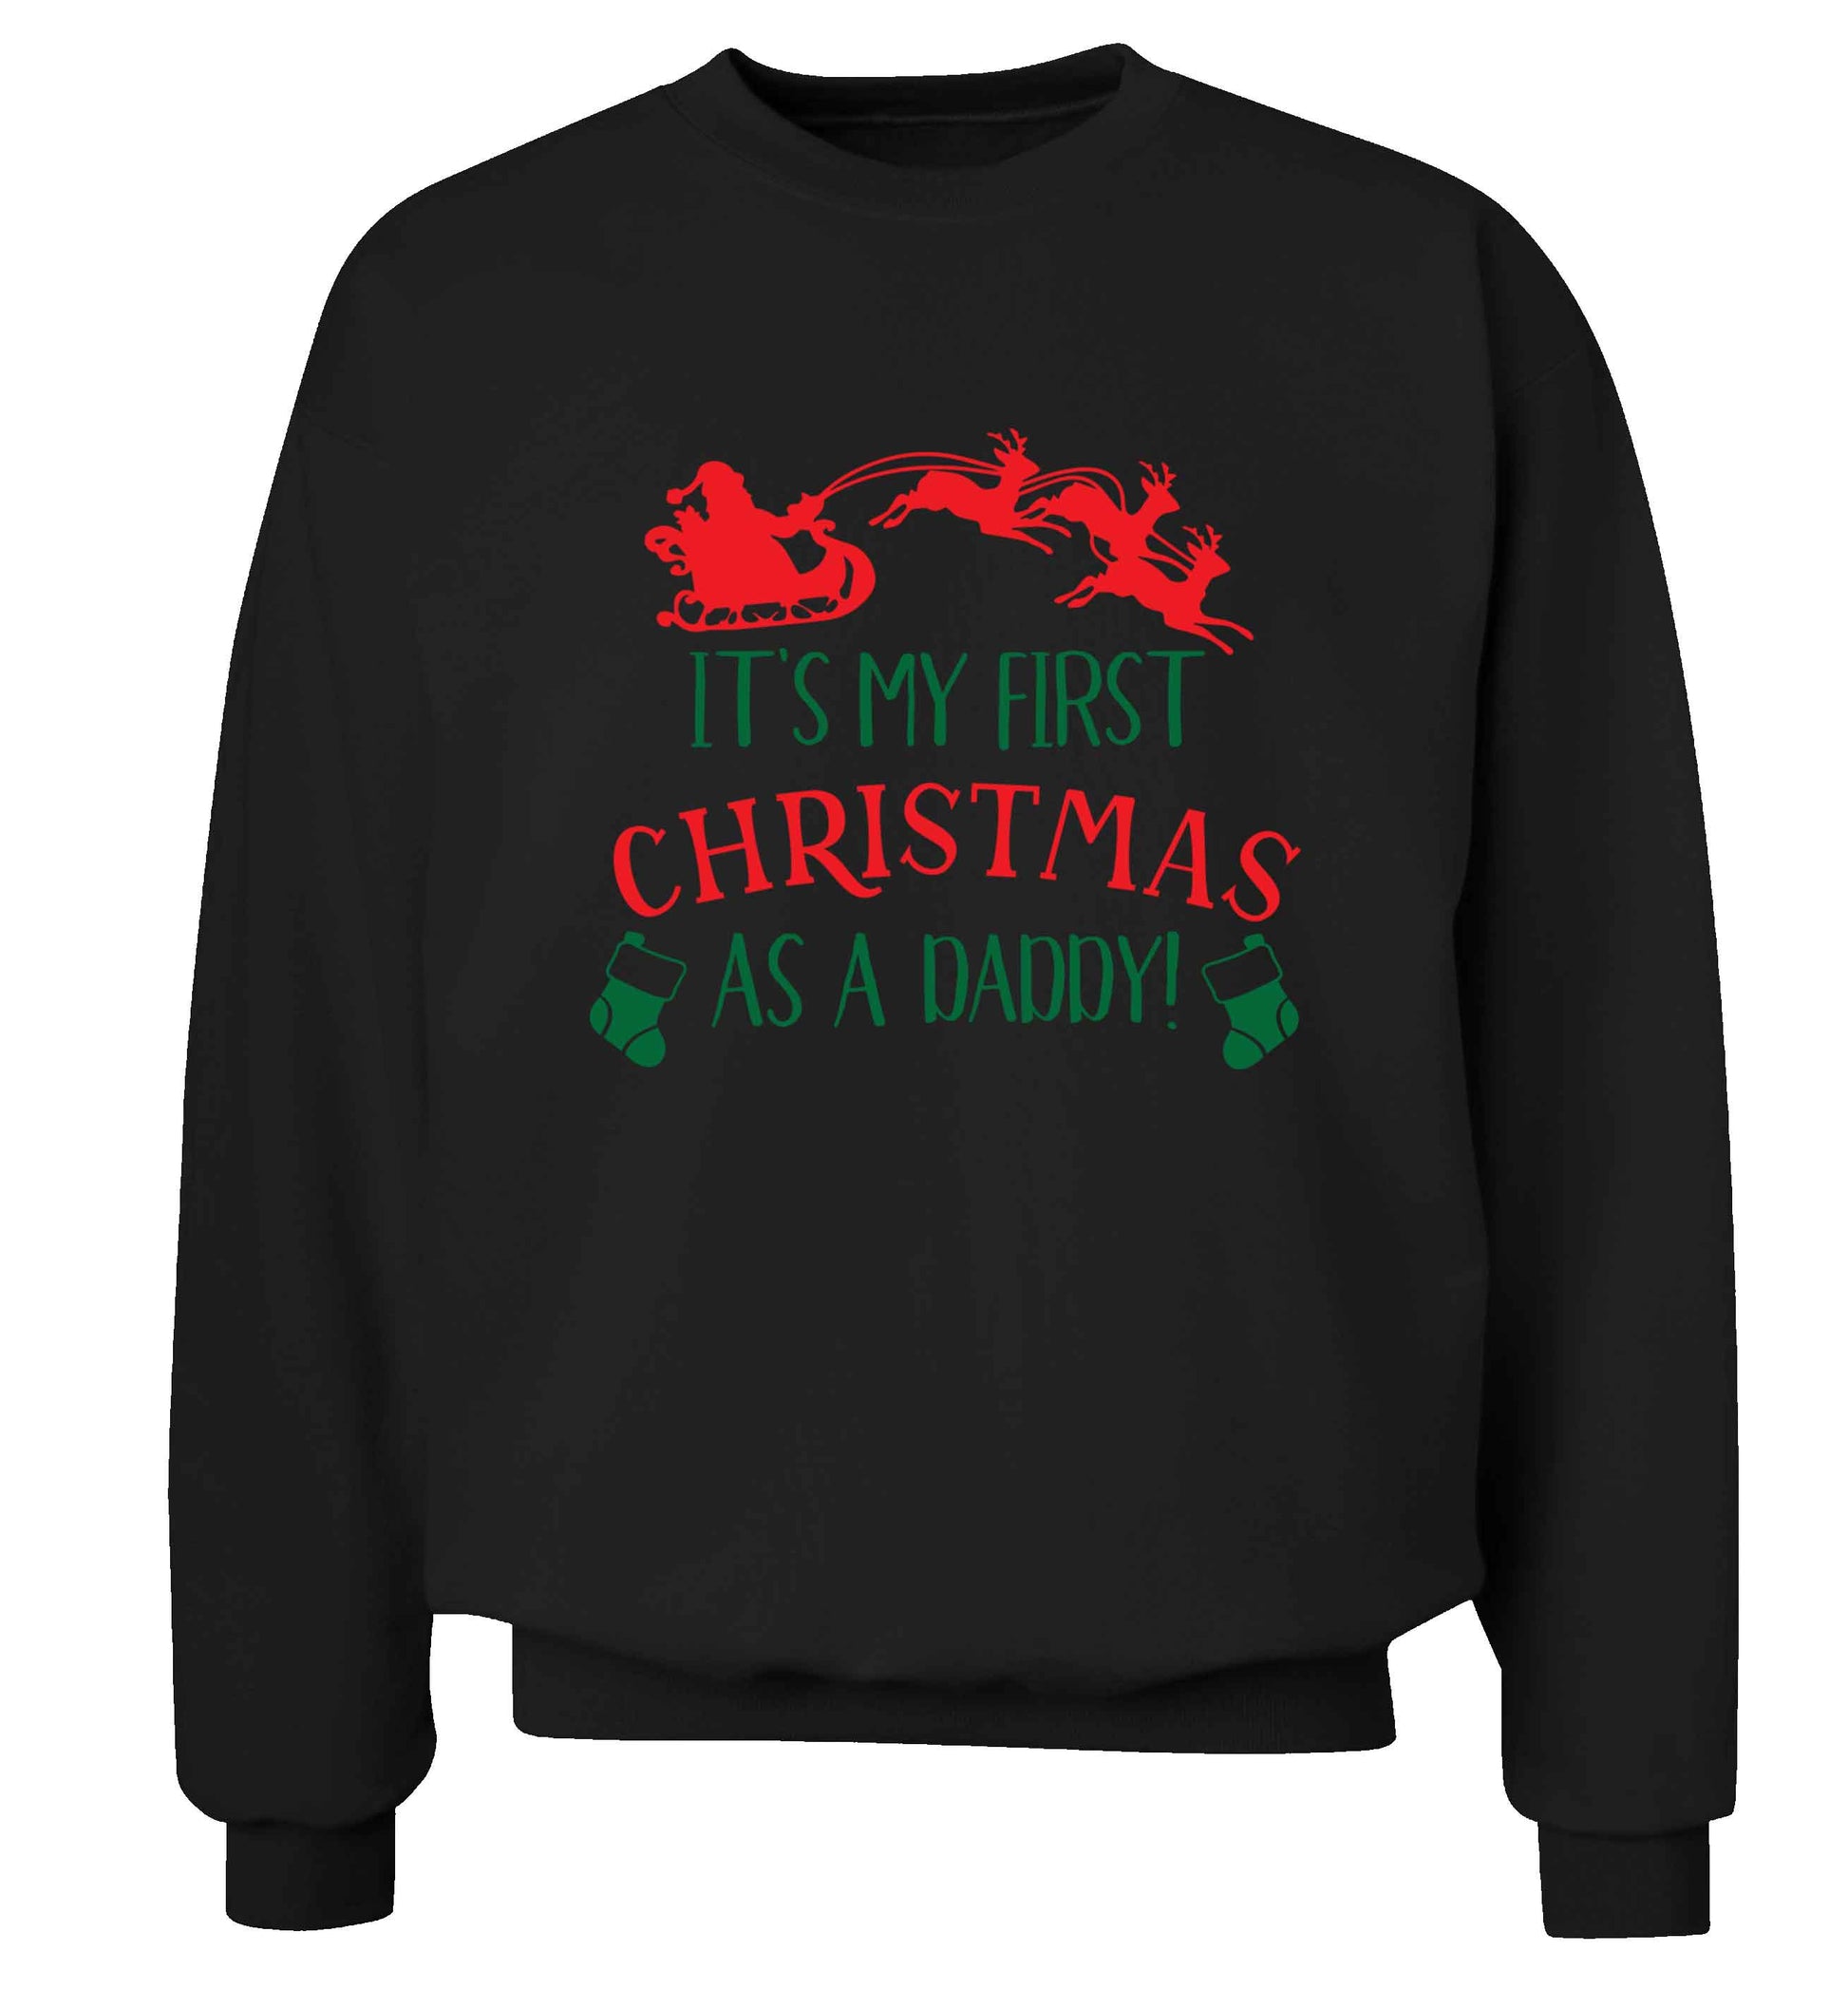 It's my first Christmas as a daddy Adult's unisex black Sweater 2XL